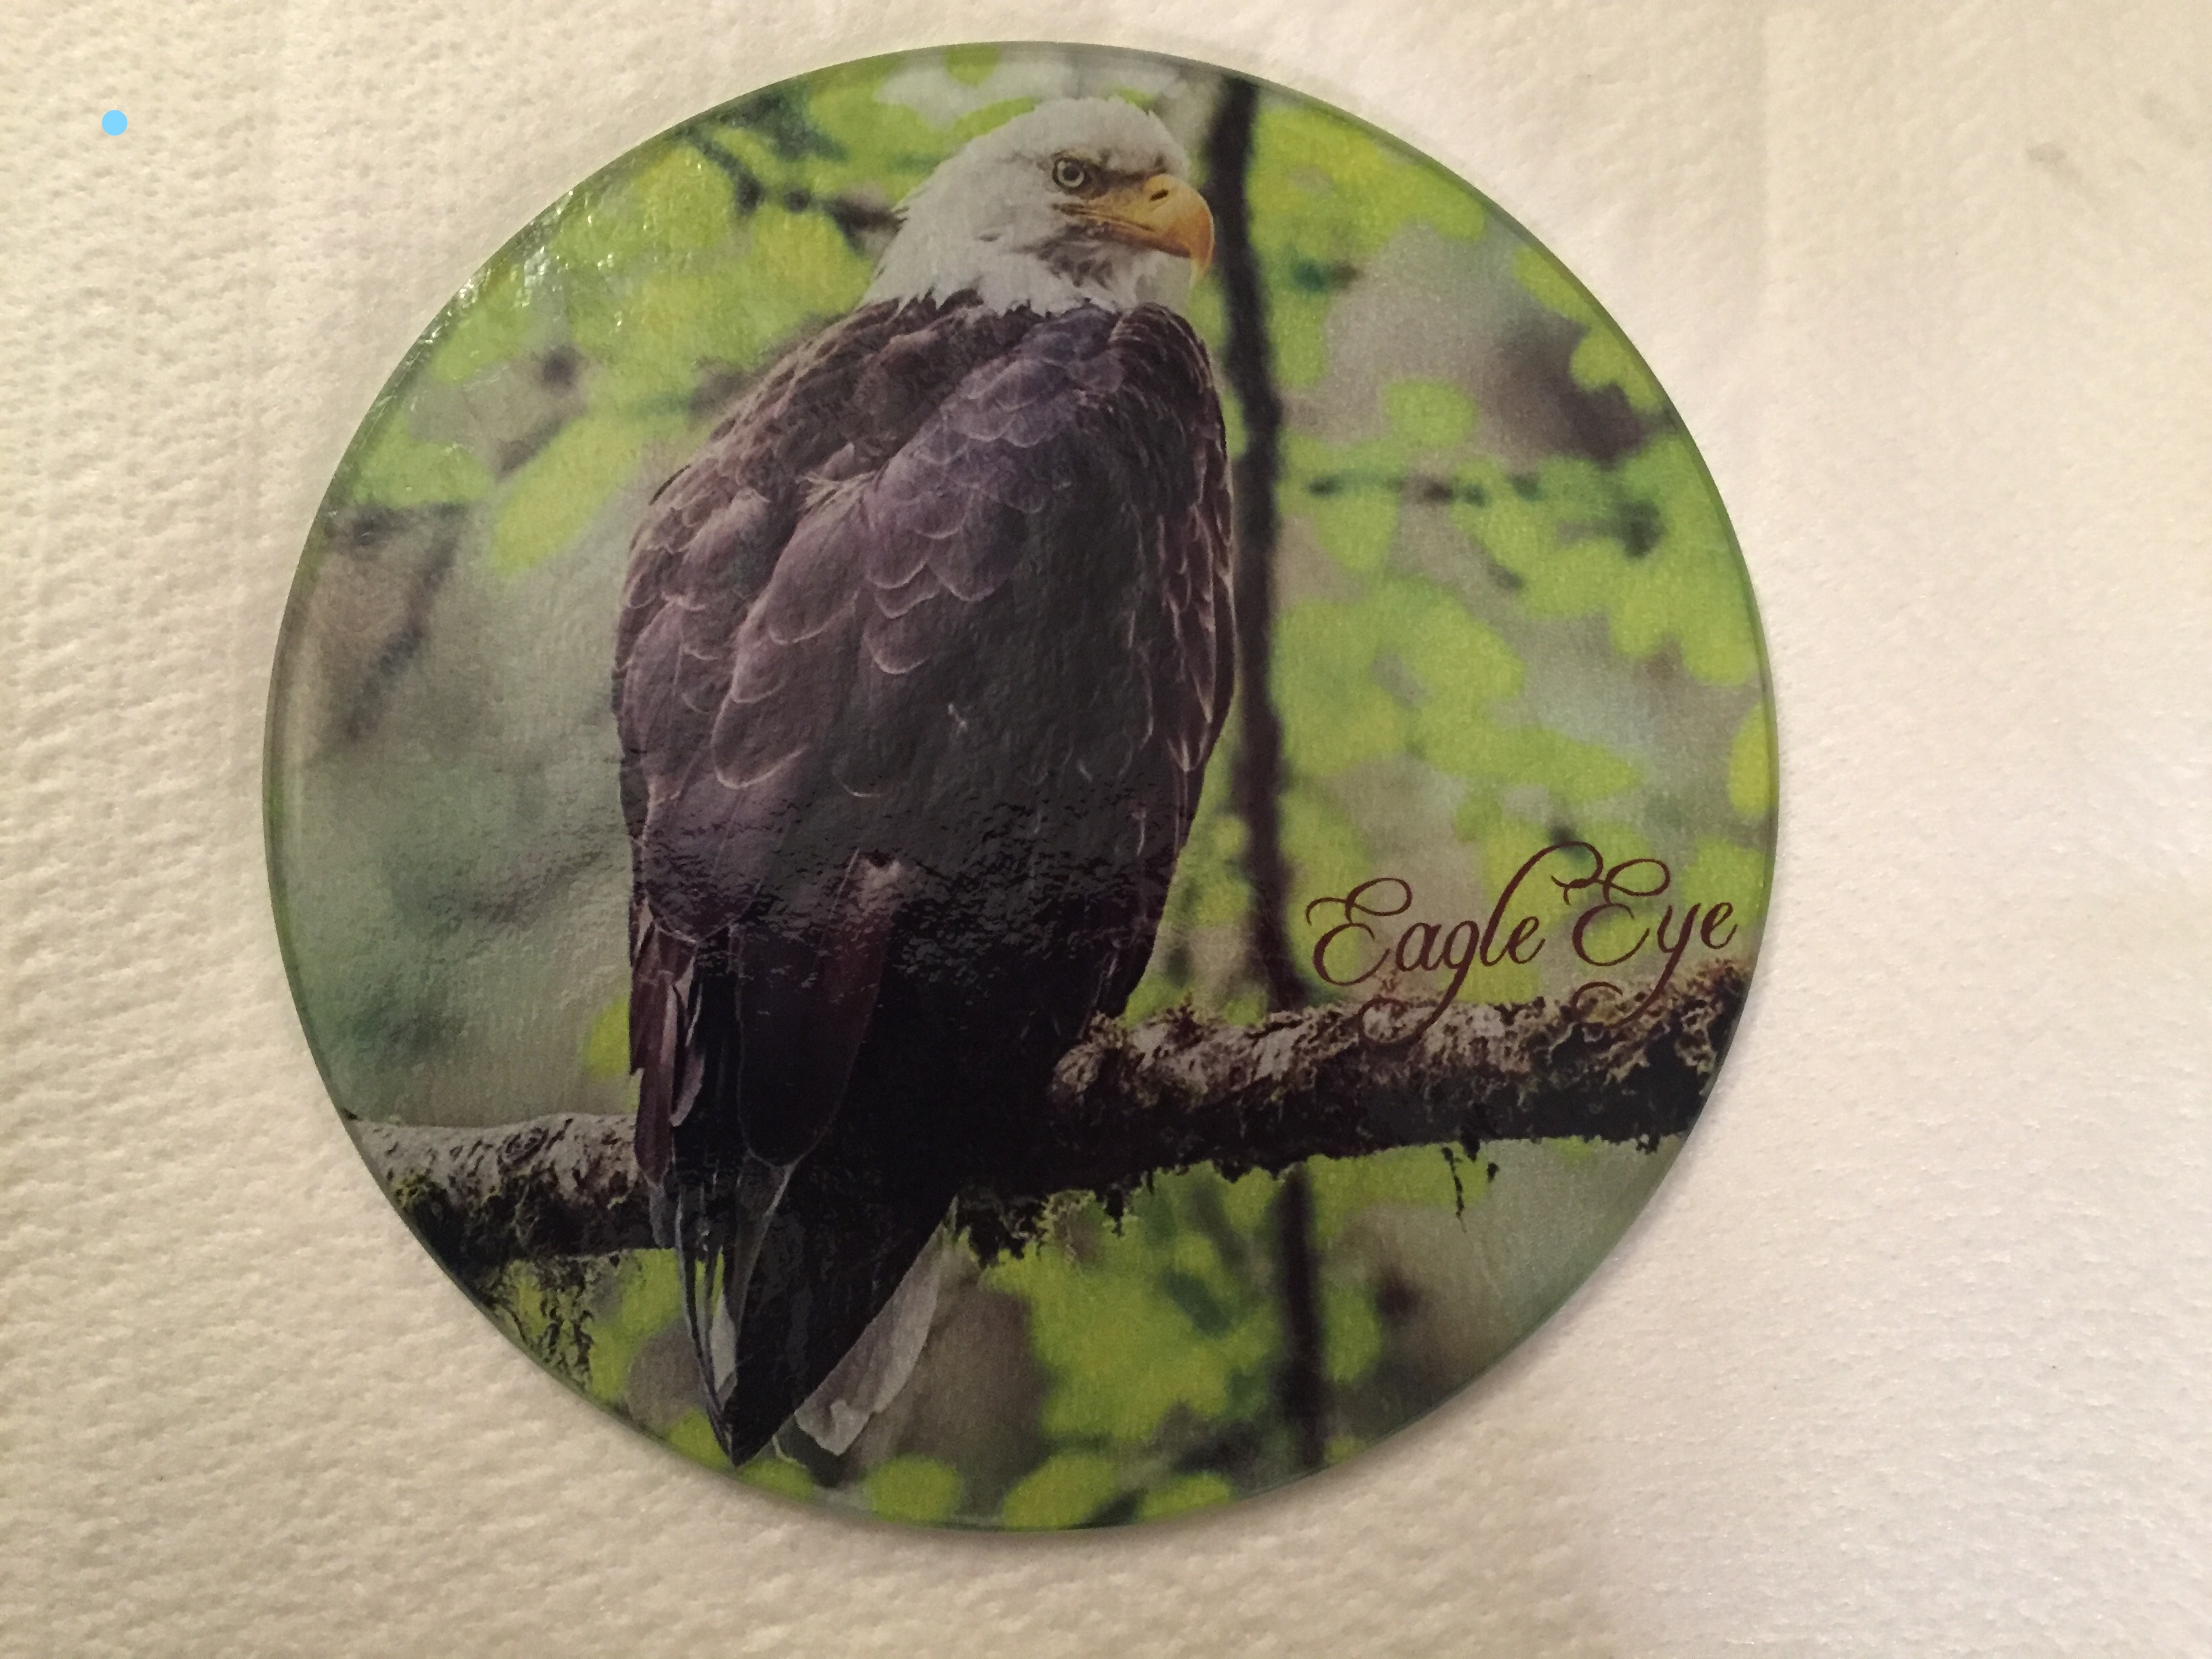 Eagle Eye made with sublimation printing